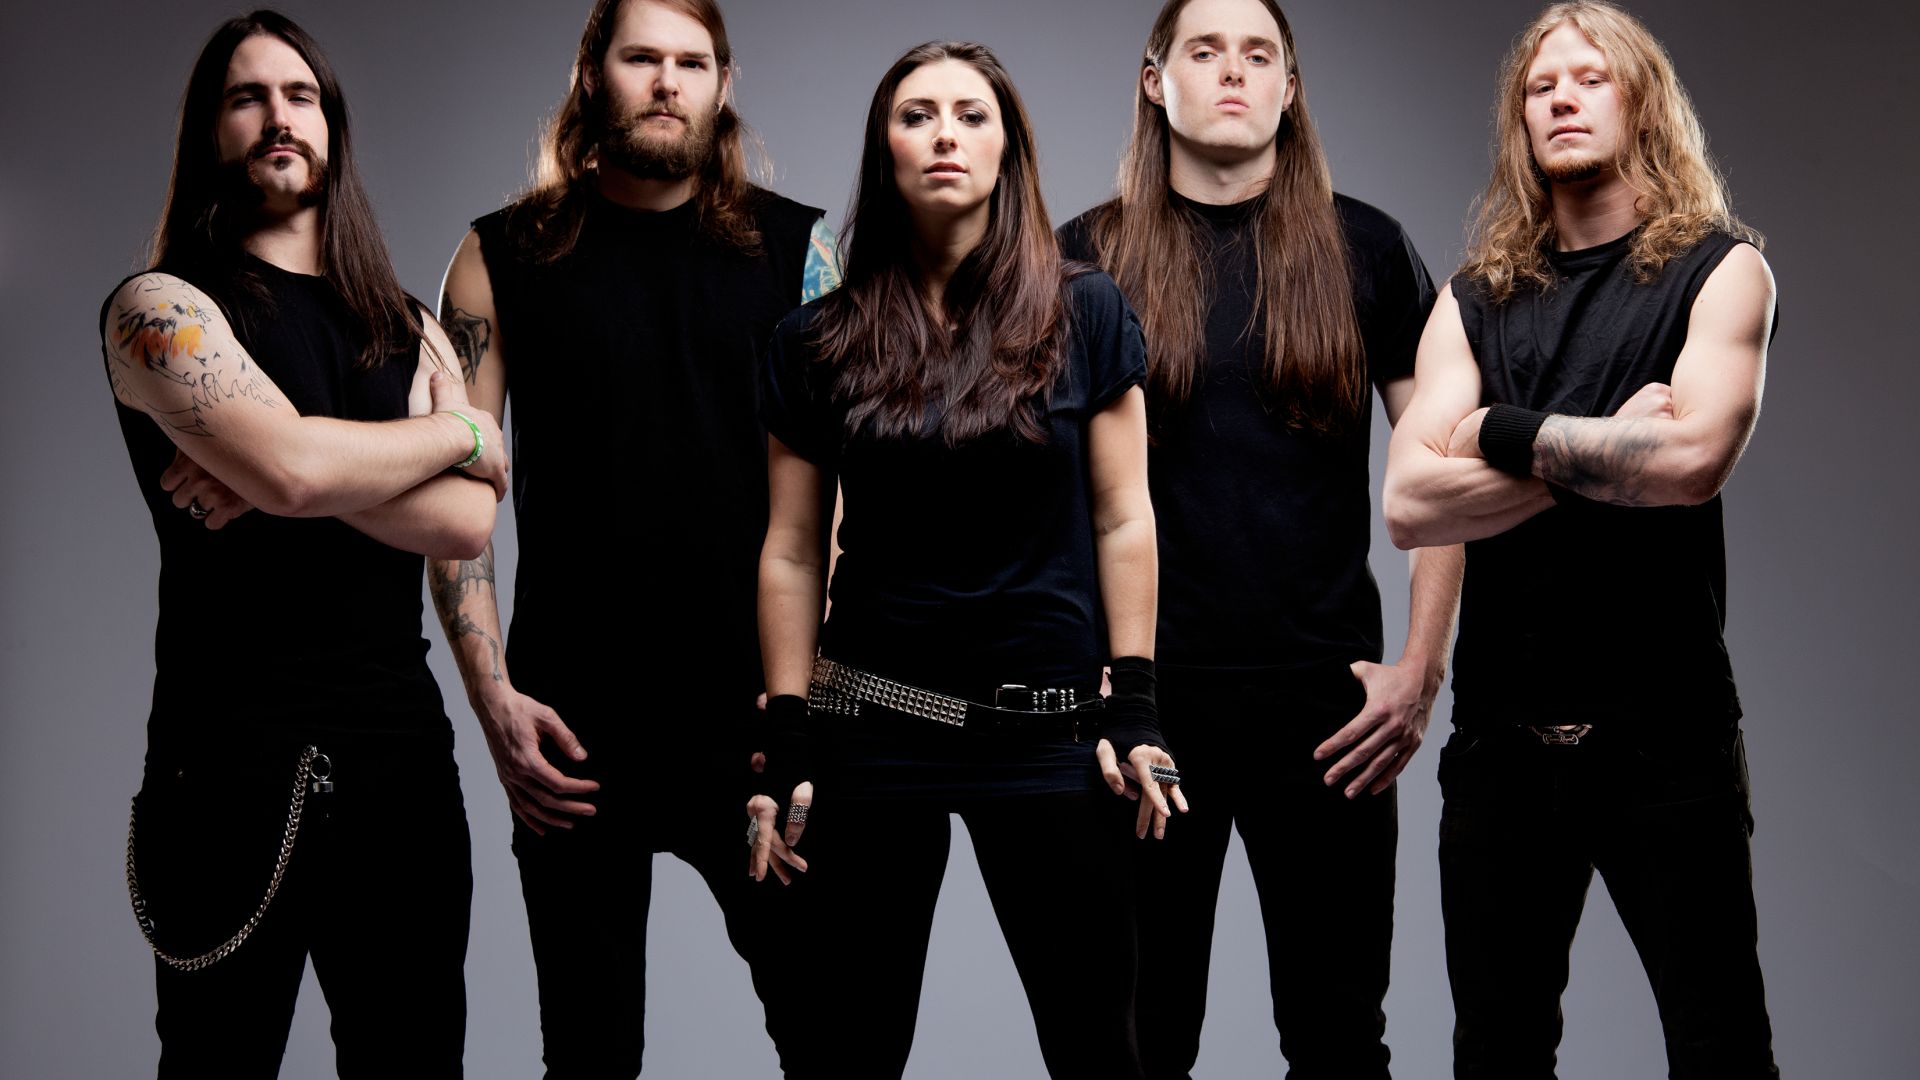 Download Unleash the Archers Top music artist and bands Brittney